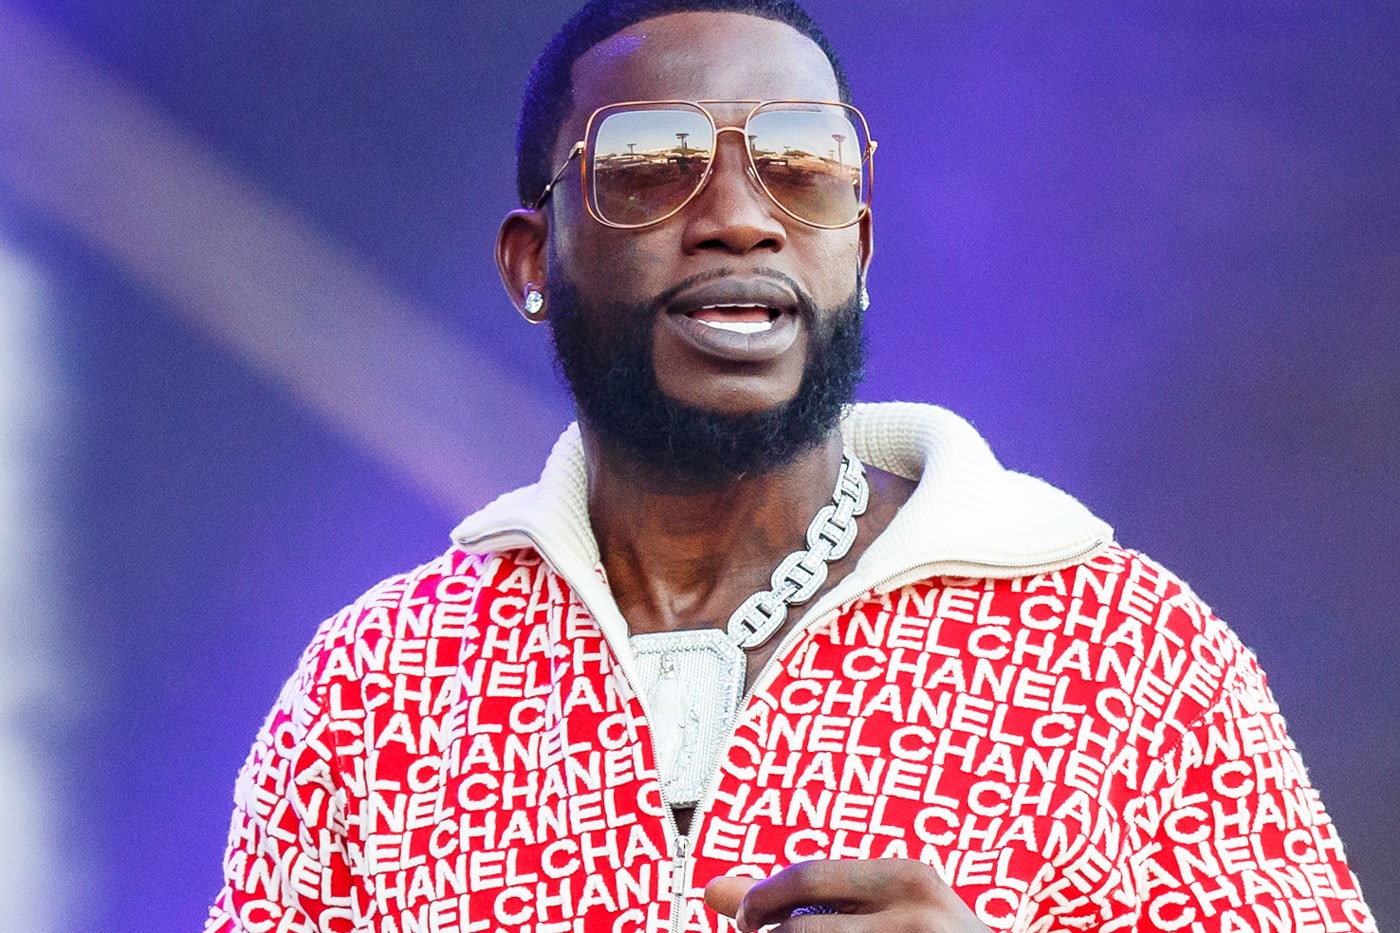 Gucci Mane Shared Two New Songs to Celebrate 10/17